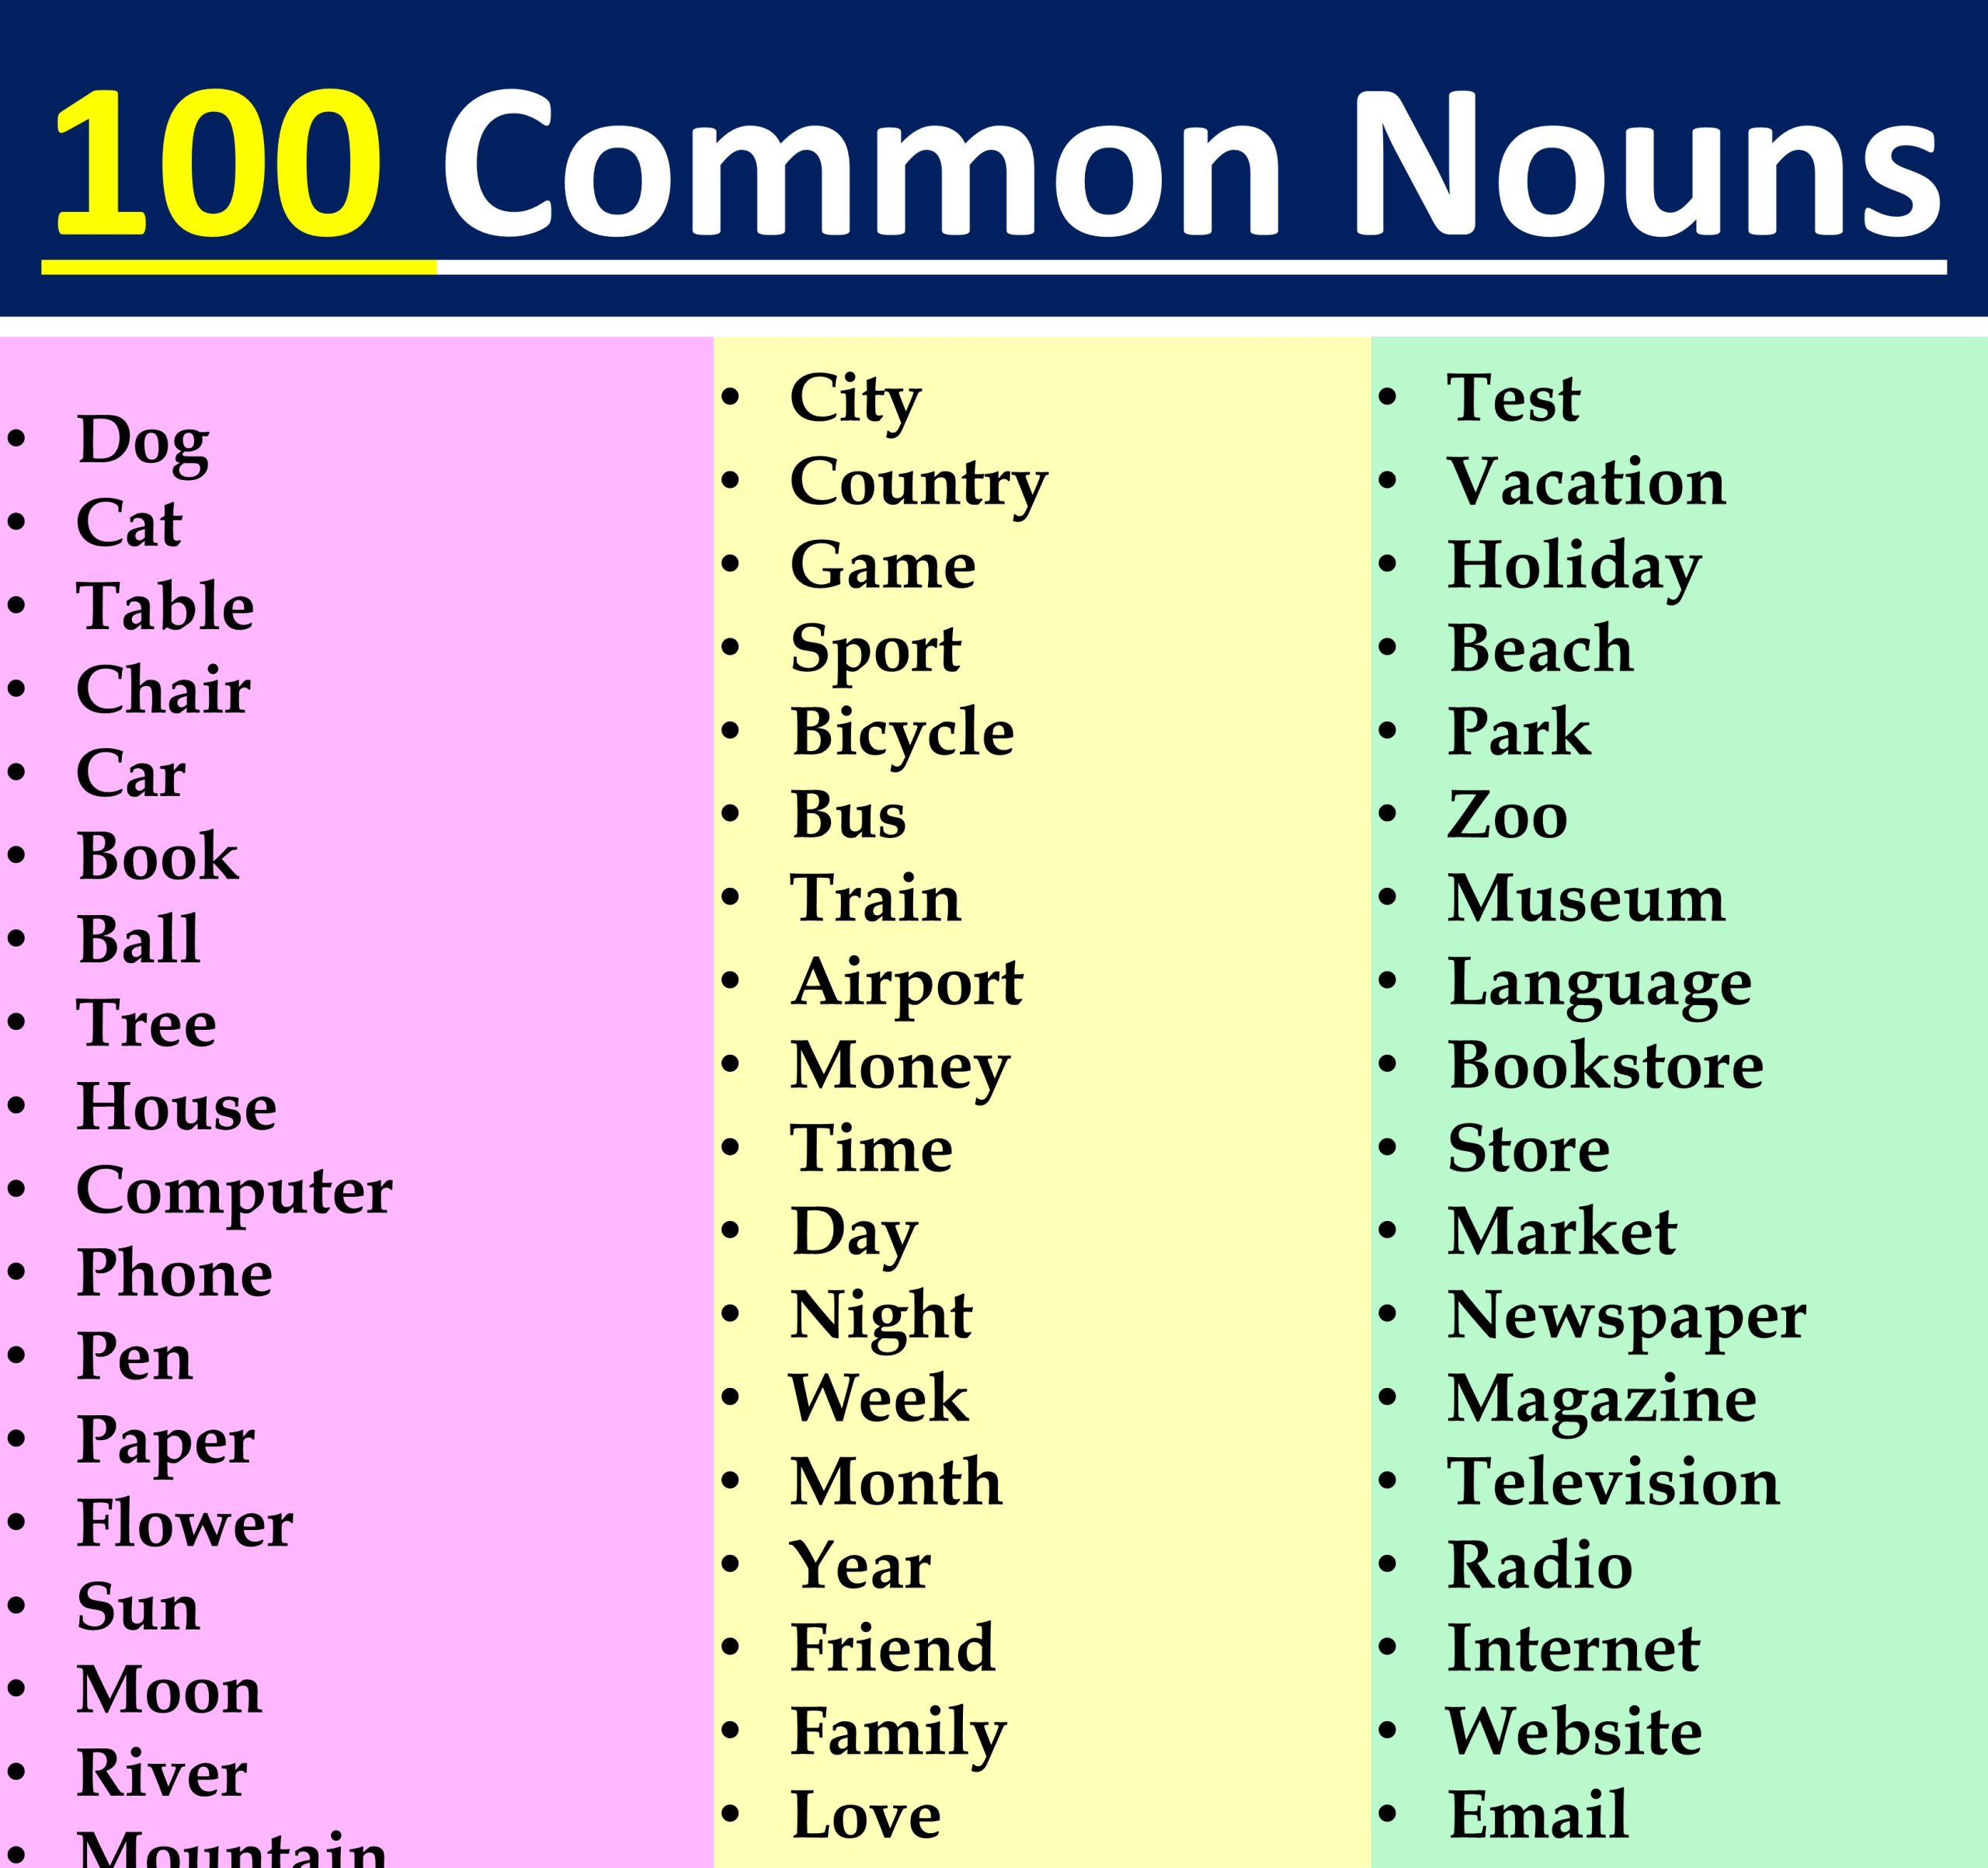 Common Nouns: Definition and Examples for Beginners